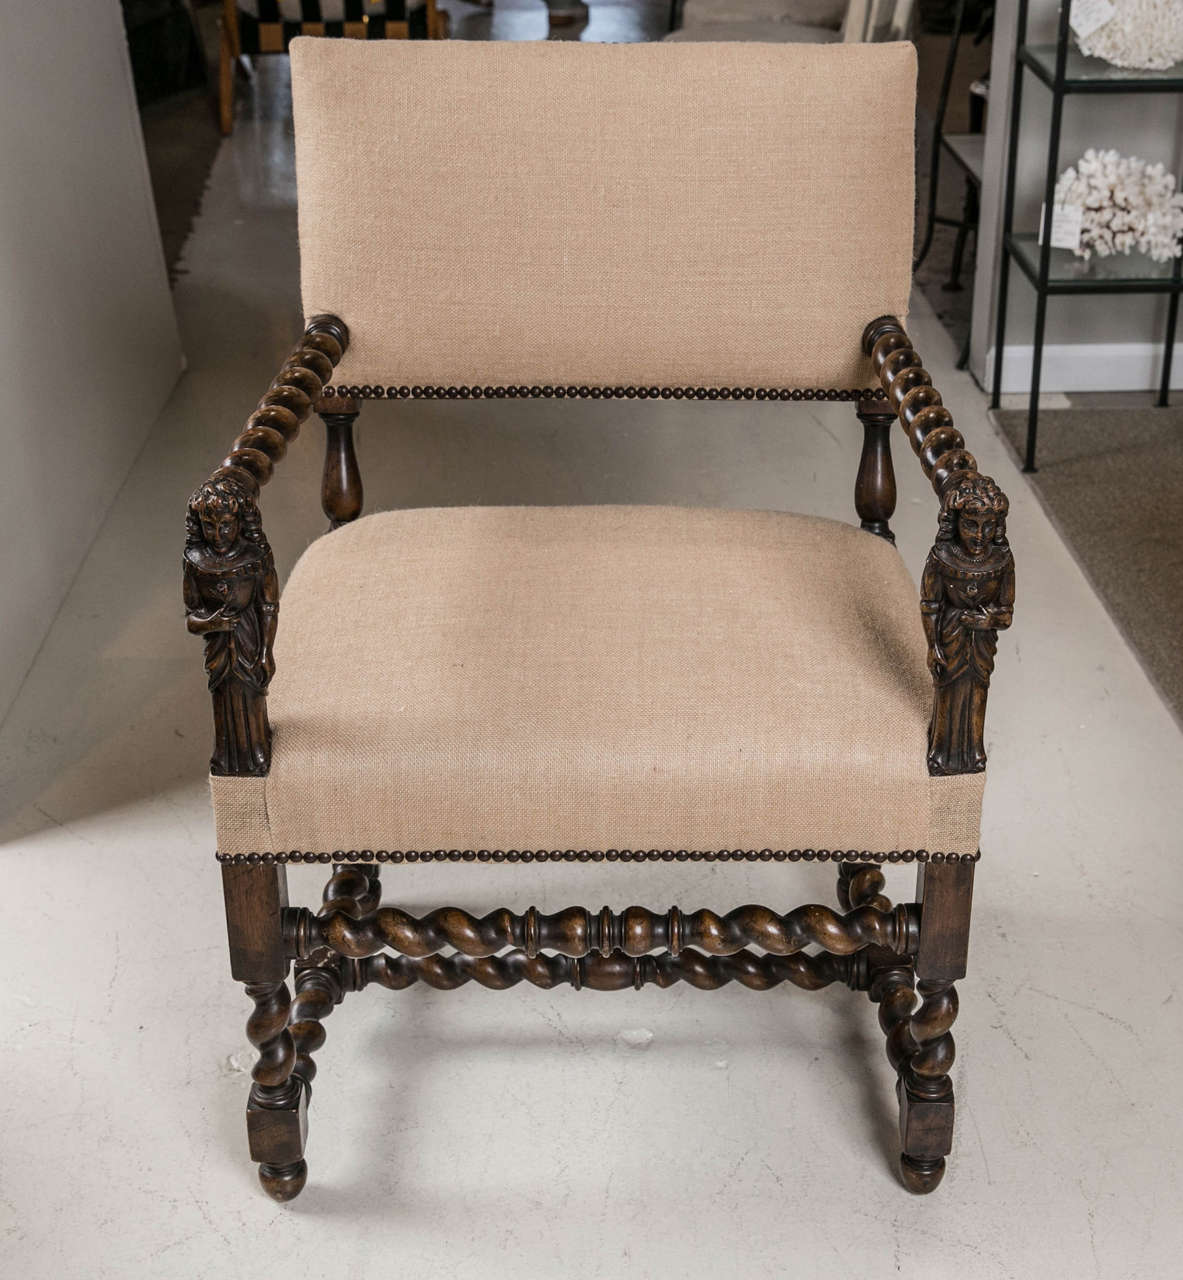 19th Century Italian Hand Carved Side Chair.  Newly upholstered in Burlap.